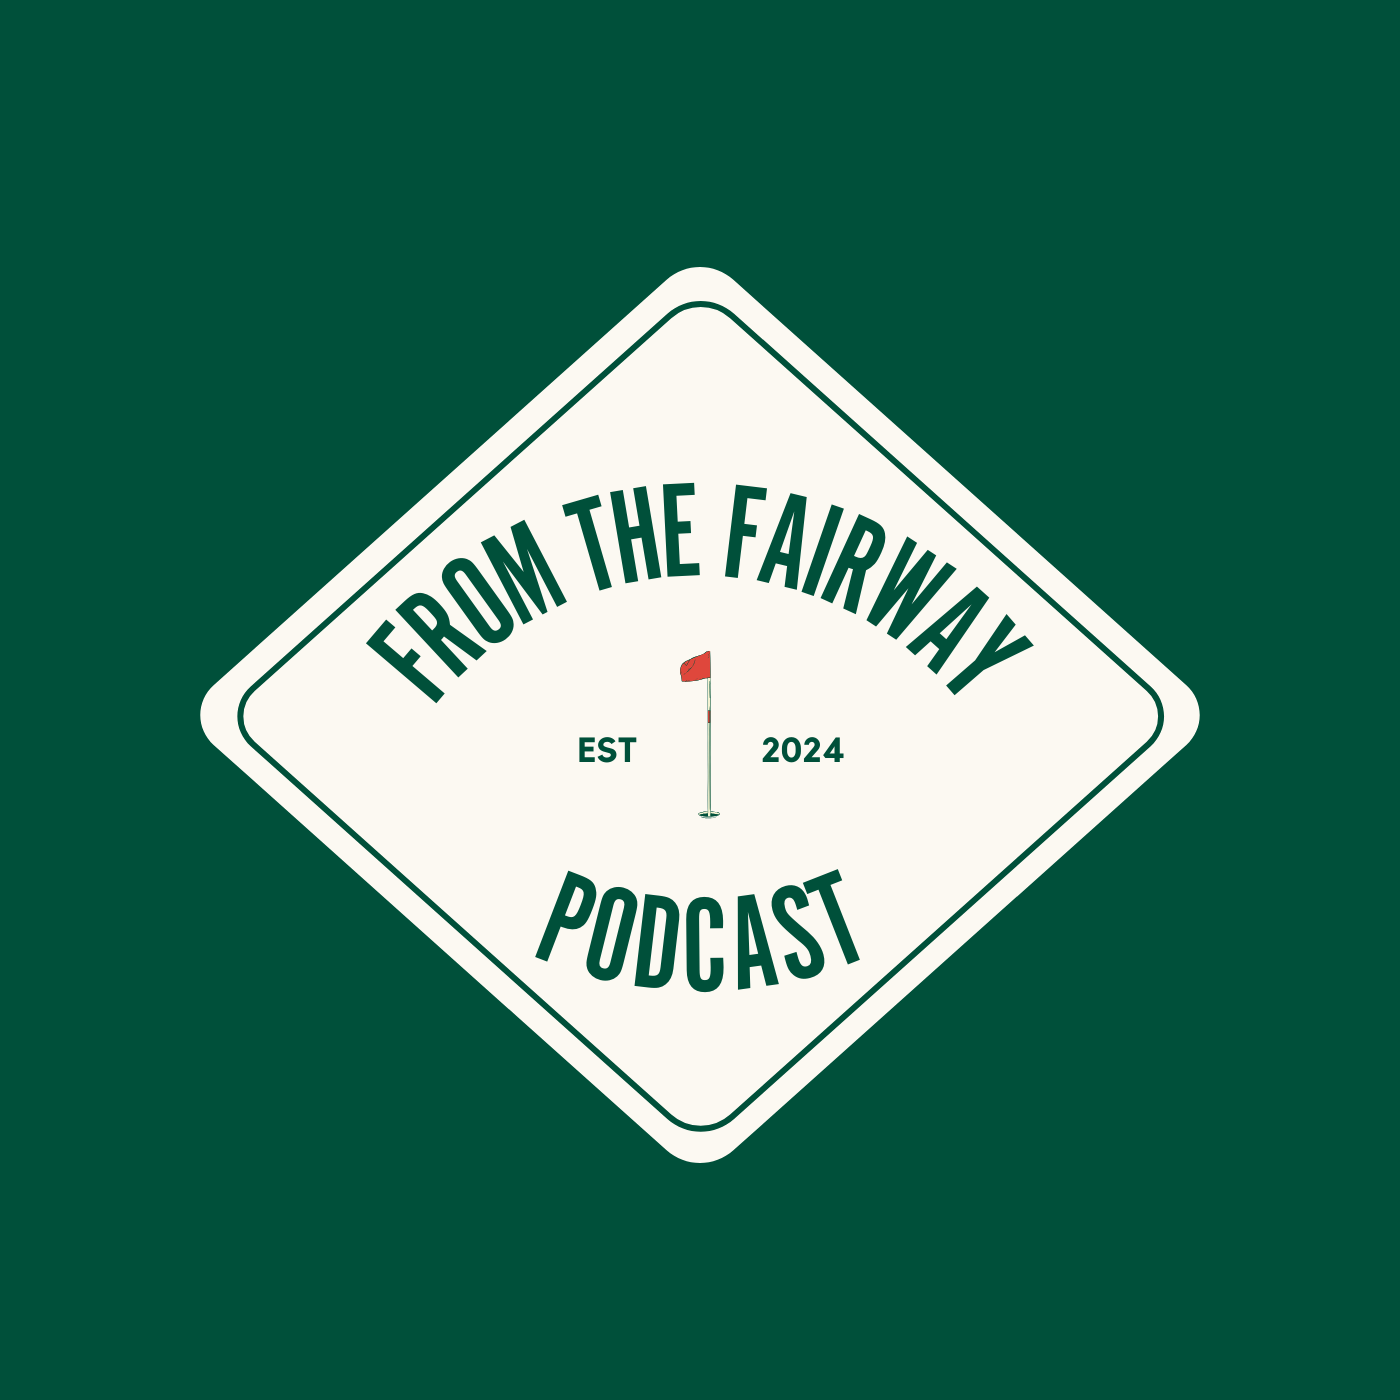 Ep. 1: From the Fairway